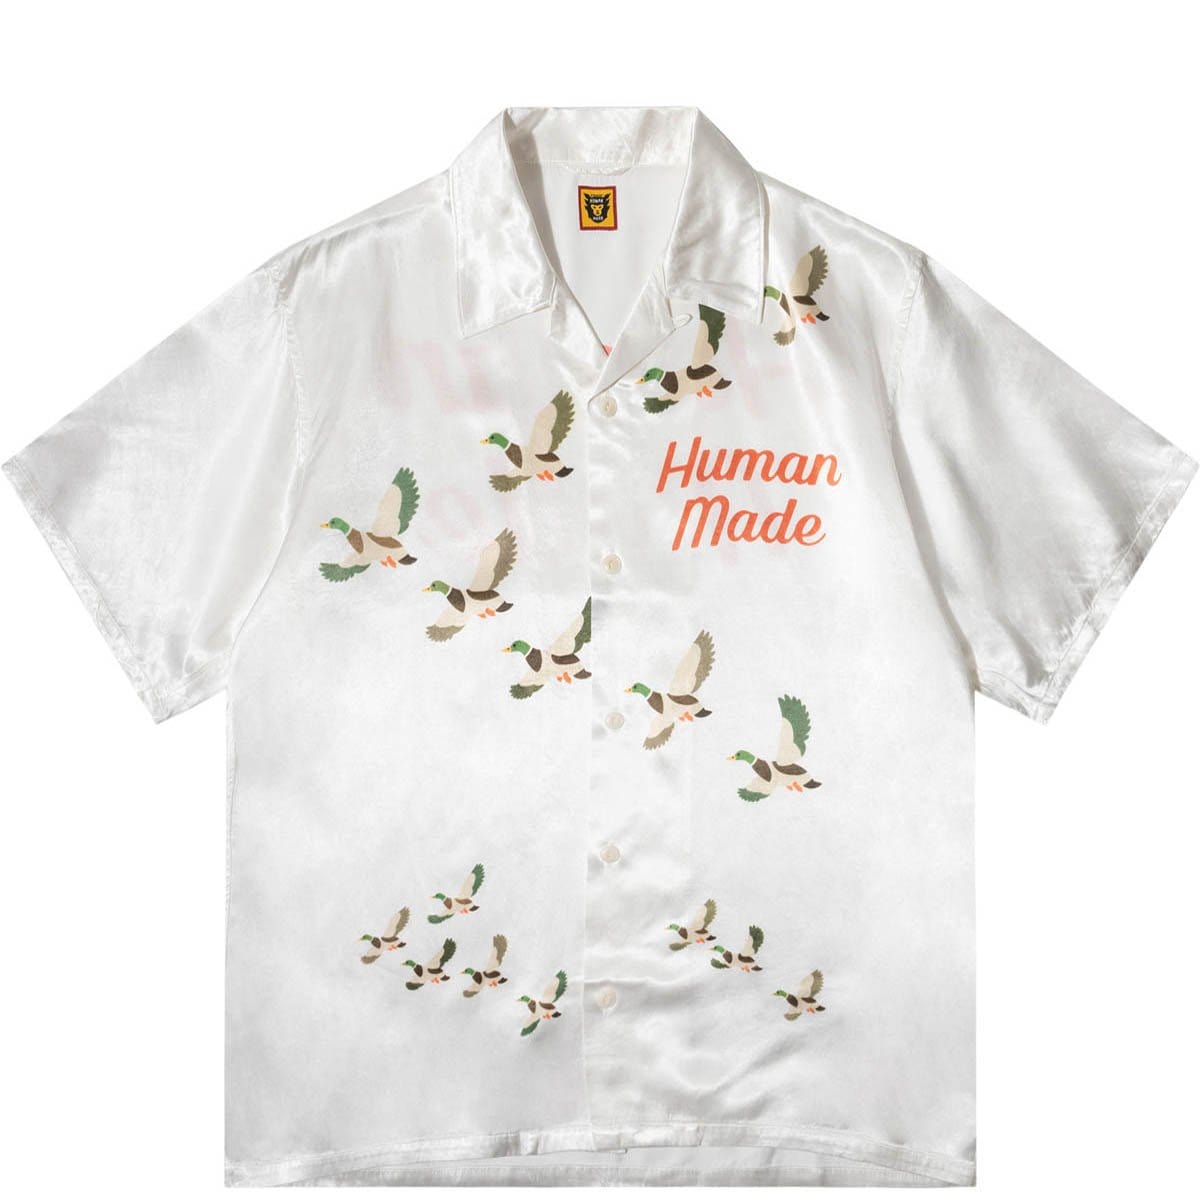 HEADQUARTER Store on Instagram: . HUMAN MADE Heart Aloha Shirt In store  and online now